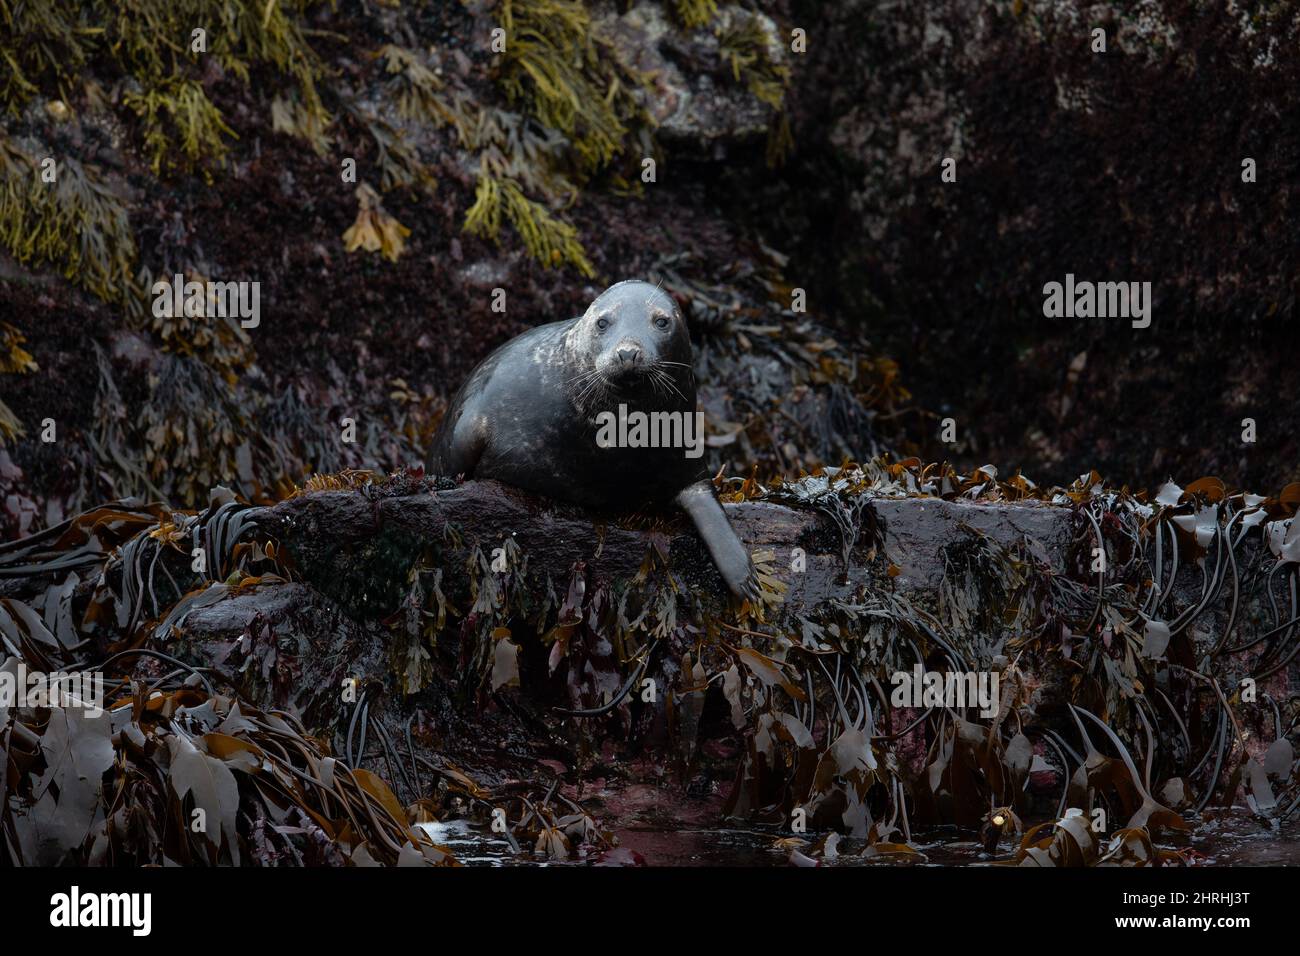 Closeup of the seal resting on the rocks. Stock Photo